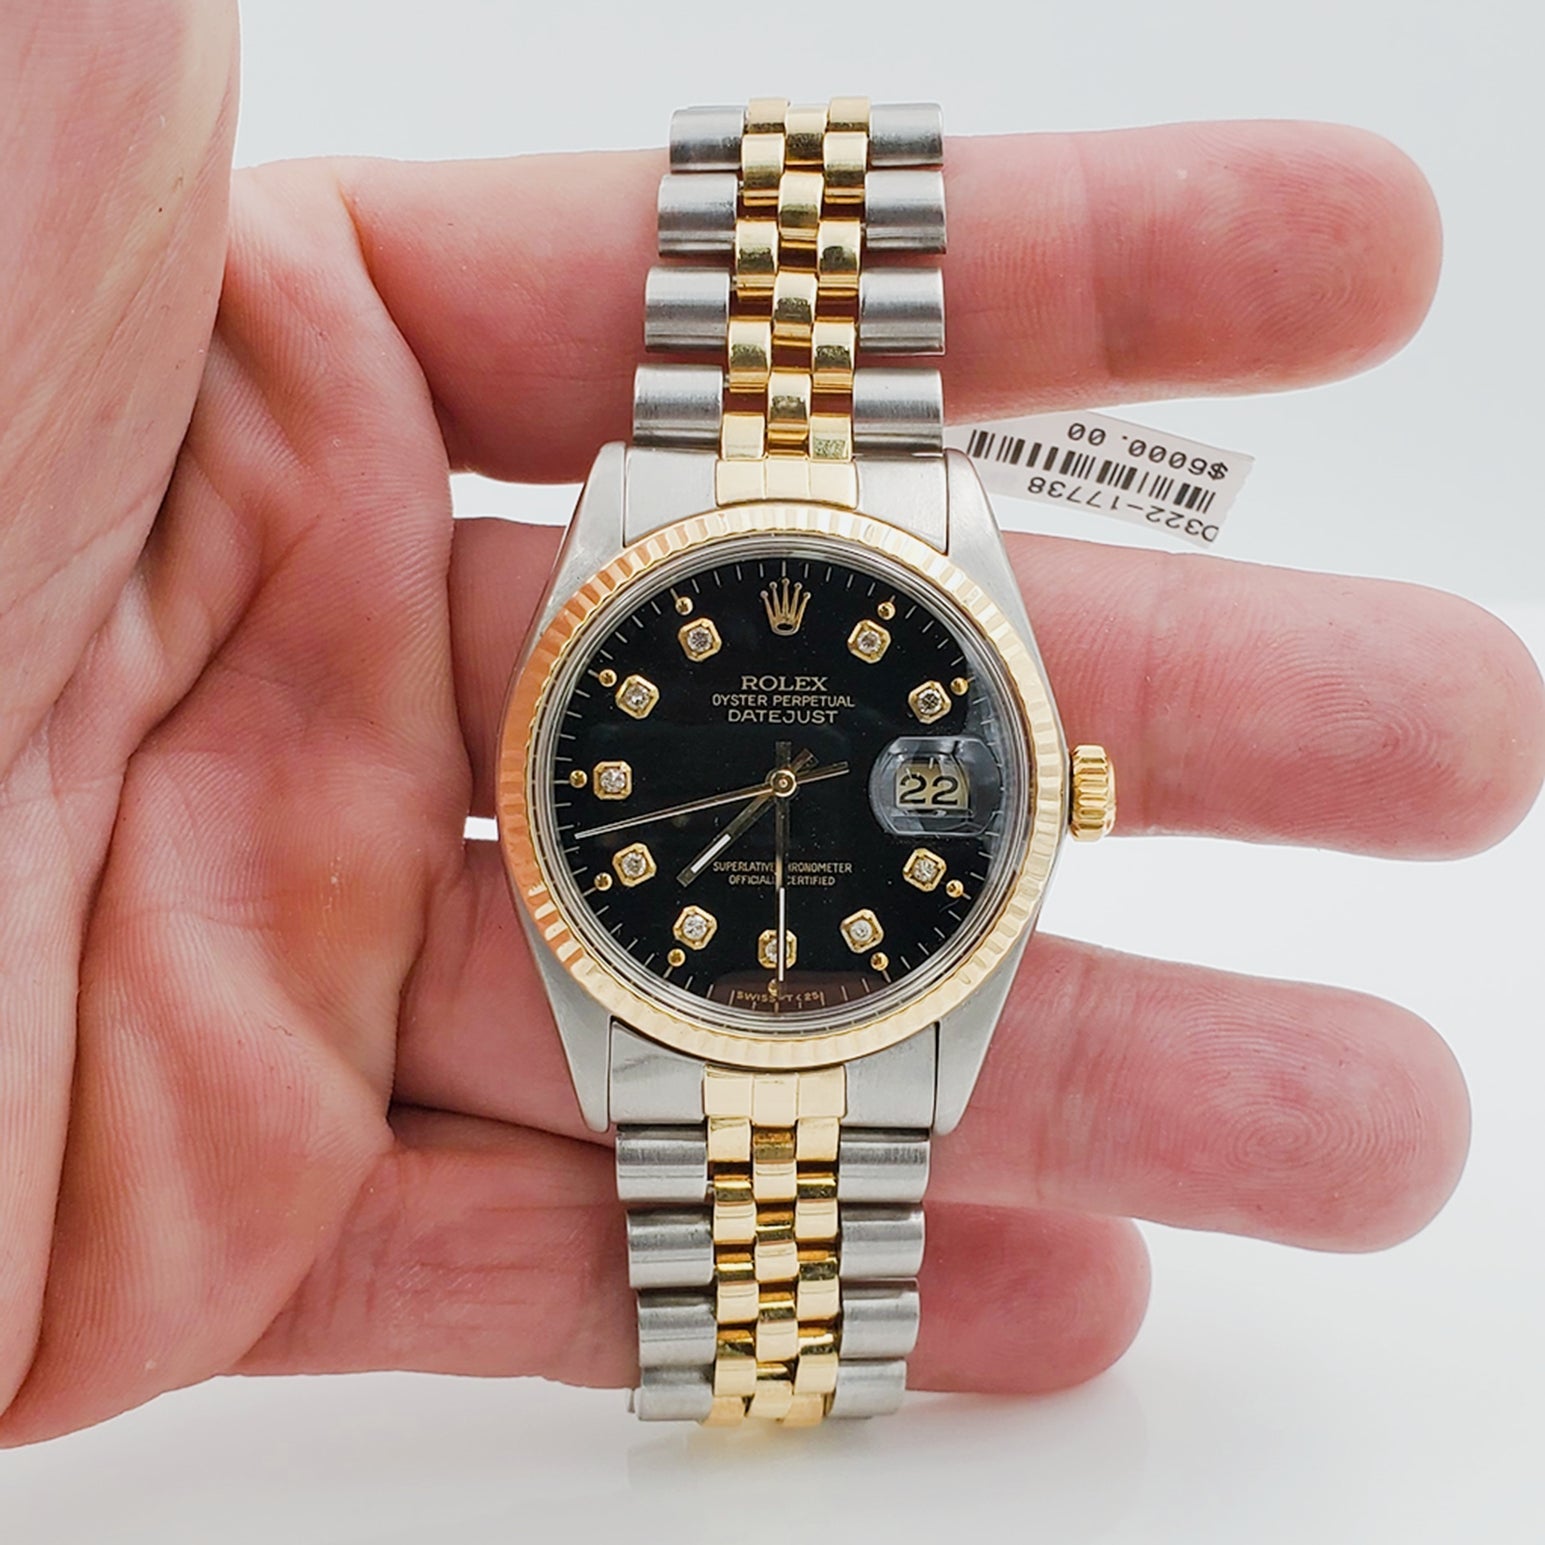 Men's Rolex 36mm DateJust 18K Gold / Stainless Steel Two Tone Watch with Black Diamond Dial and Fluted Bezel. (Pre-Owned 16233)